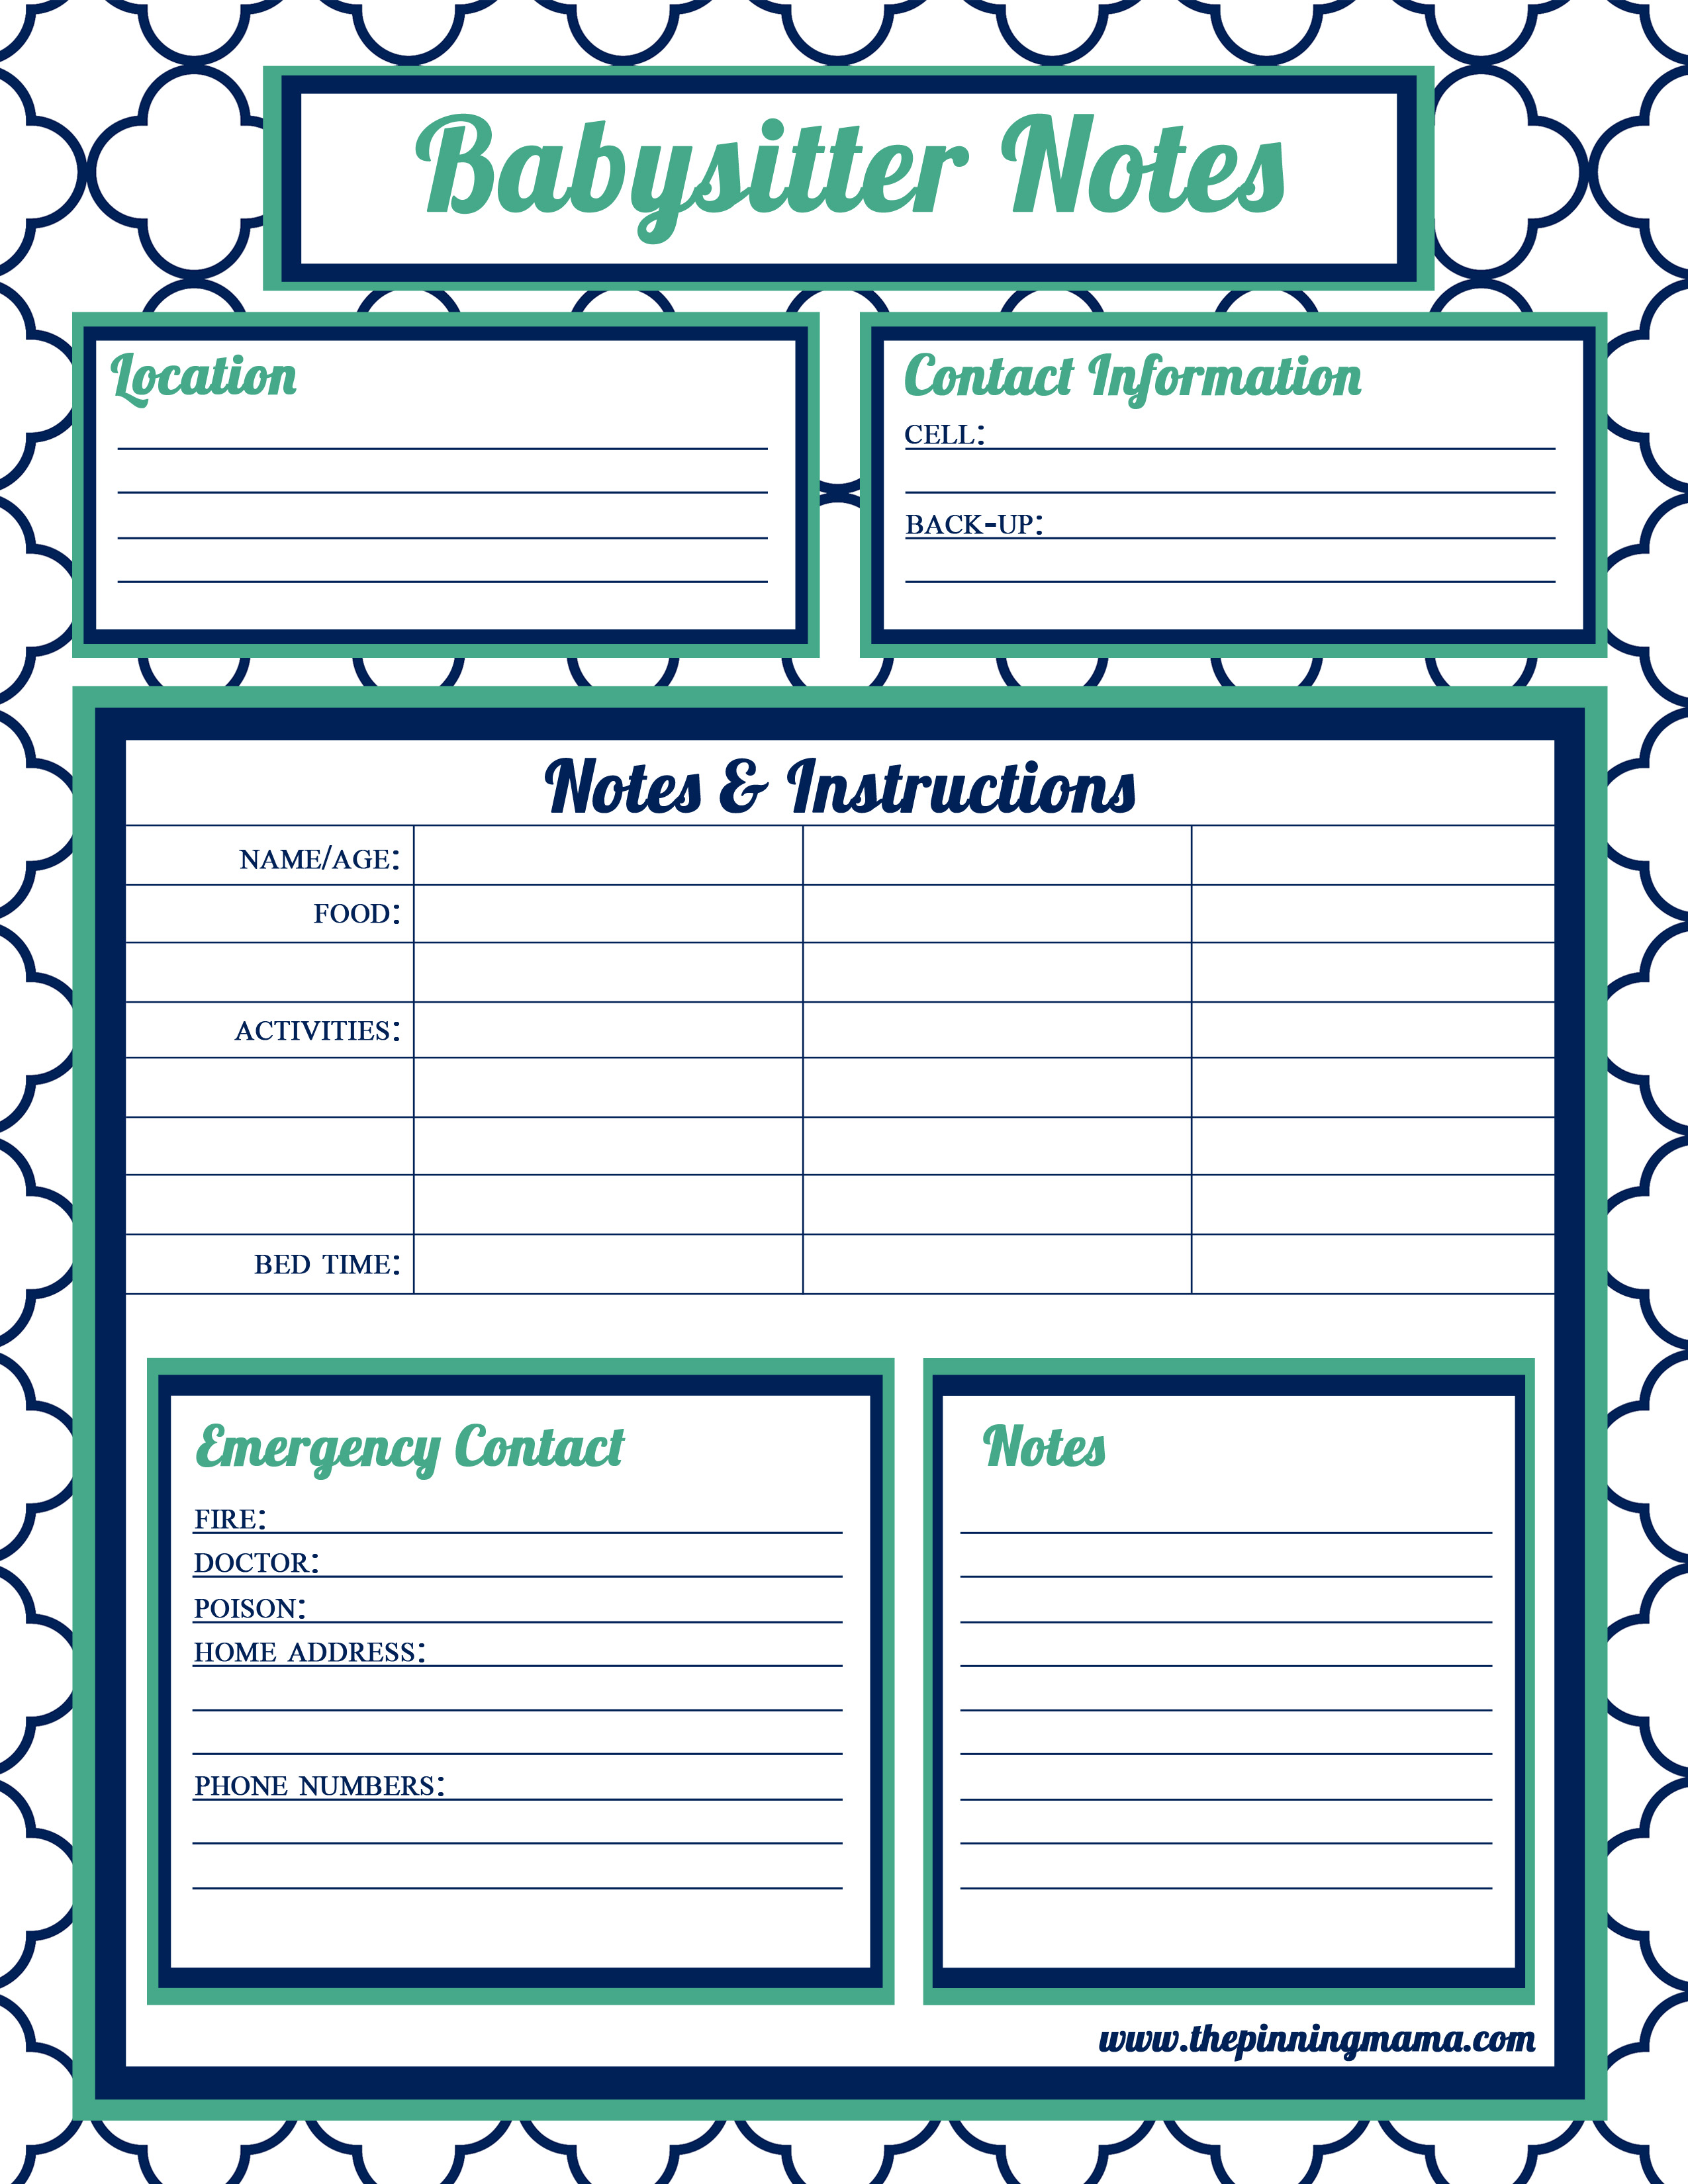 babysitter-forms-printable-free-printable-forms-free-online